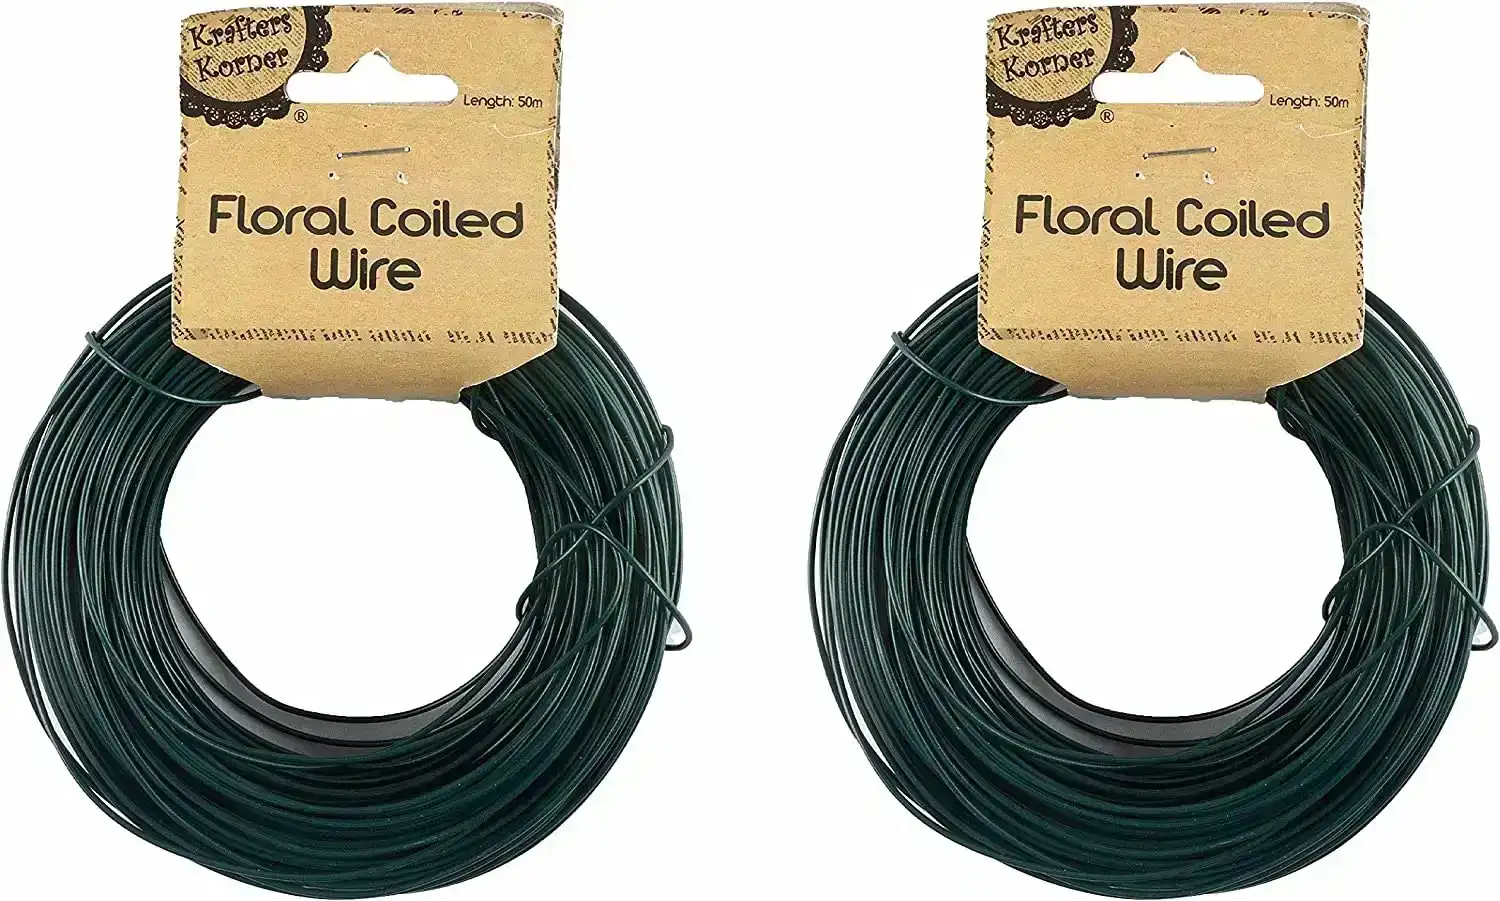 Krafters Korner Floral Coiled Wire 50M Green for Arts and Crafts DIY Projects